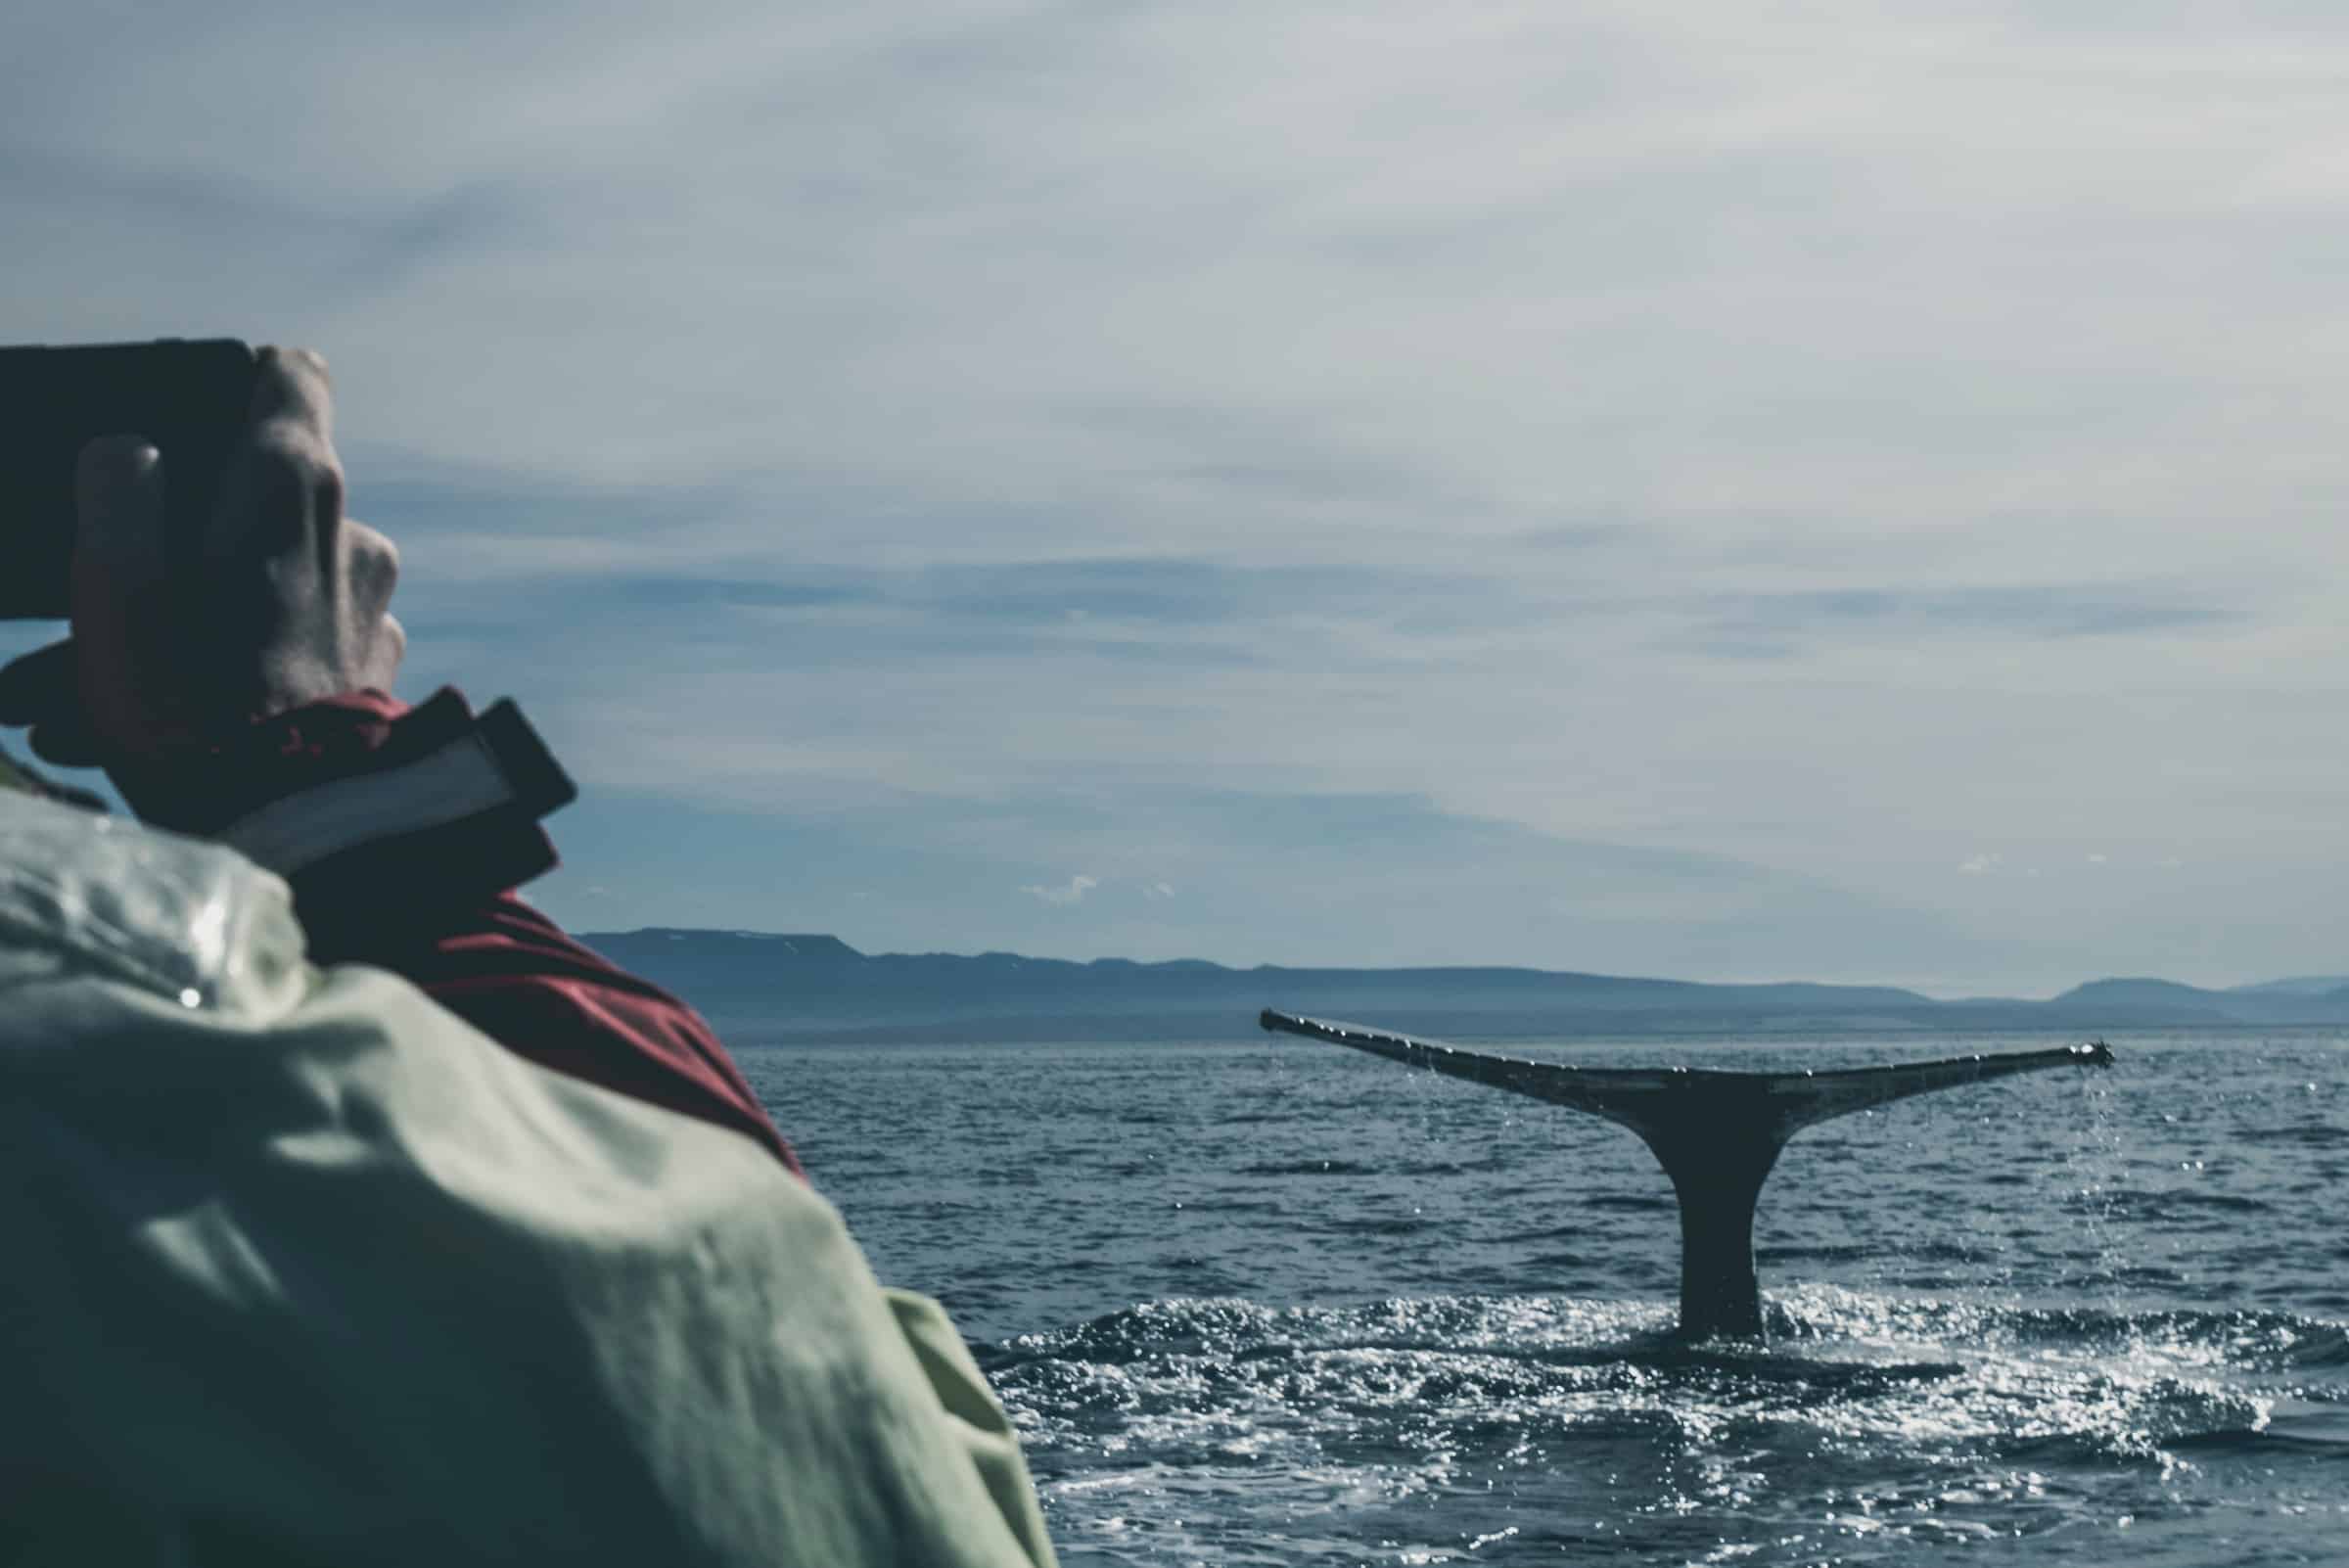 Whale watching tips 2 - Learn more about whale behaviors